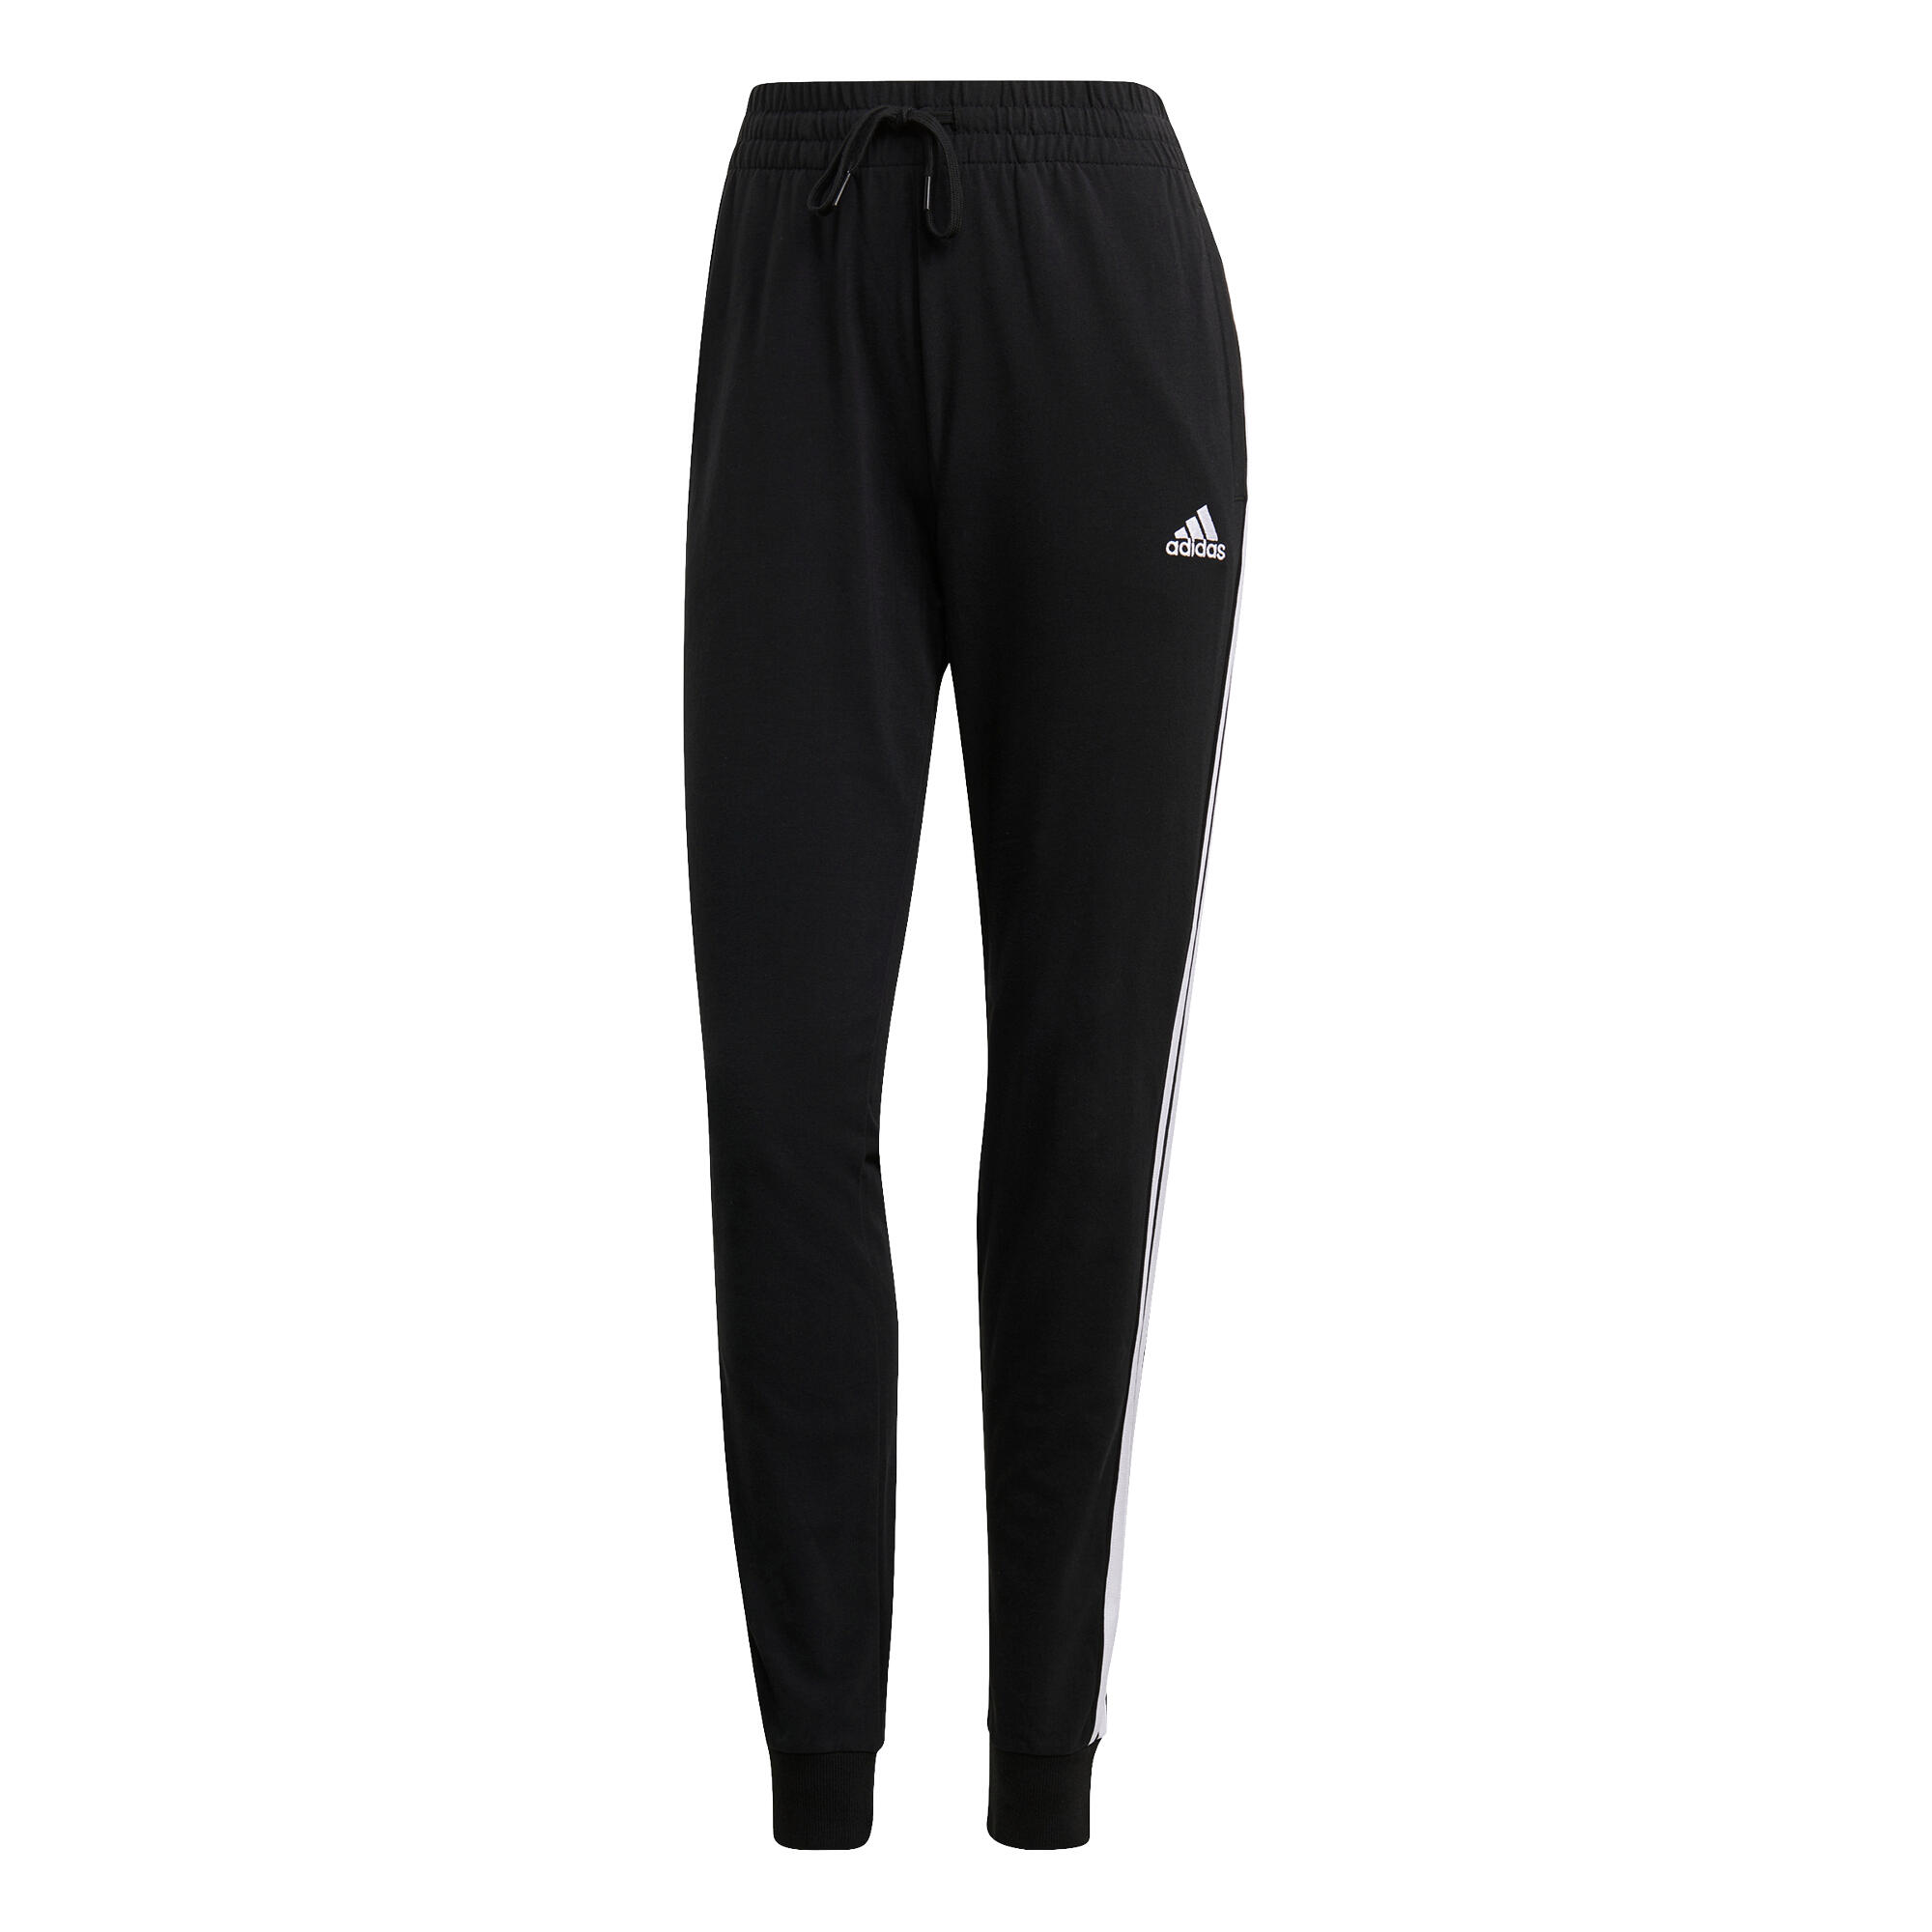 Women's Cotton-Rich Fitted Jogging Fitness Bottoms 3 Stripes - Black 6/6